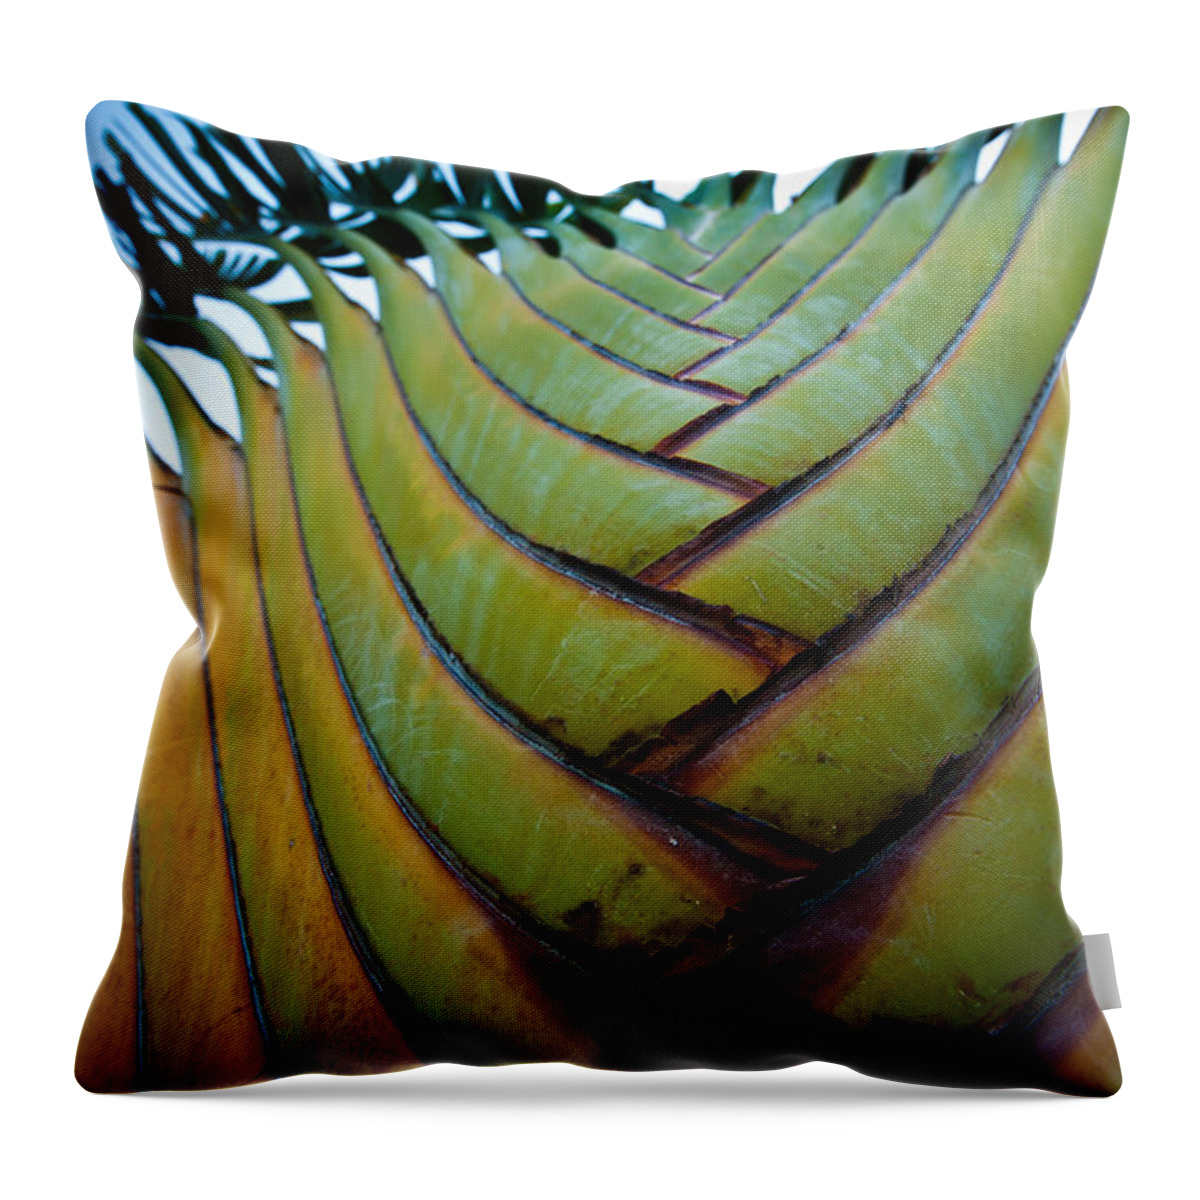 Los Cabos Throw Pillow featuring the photograph To The Sky by Sebastian Musial